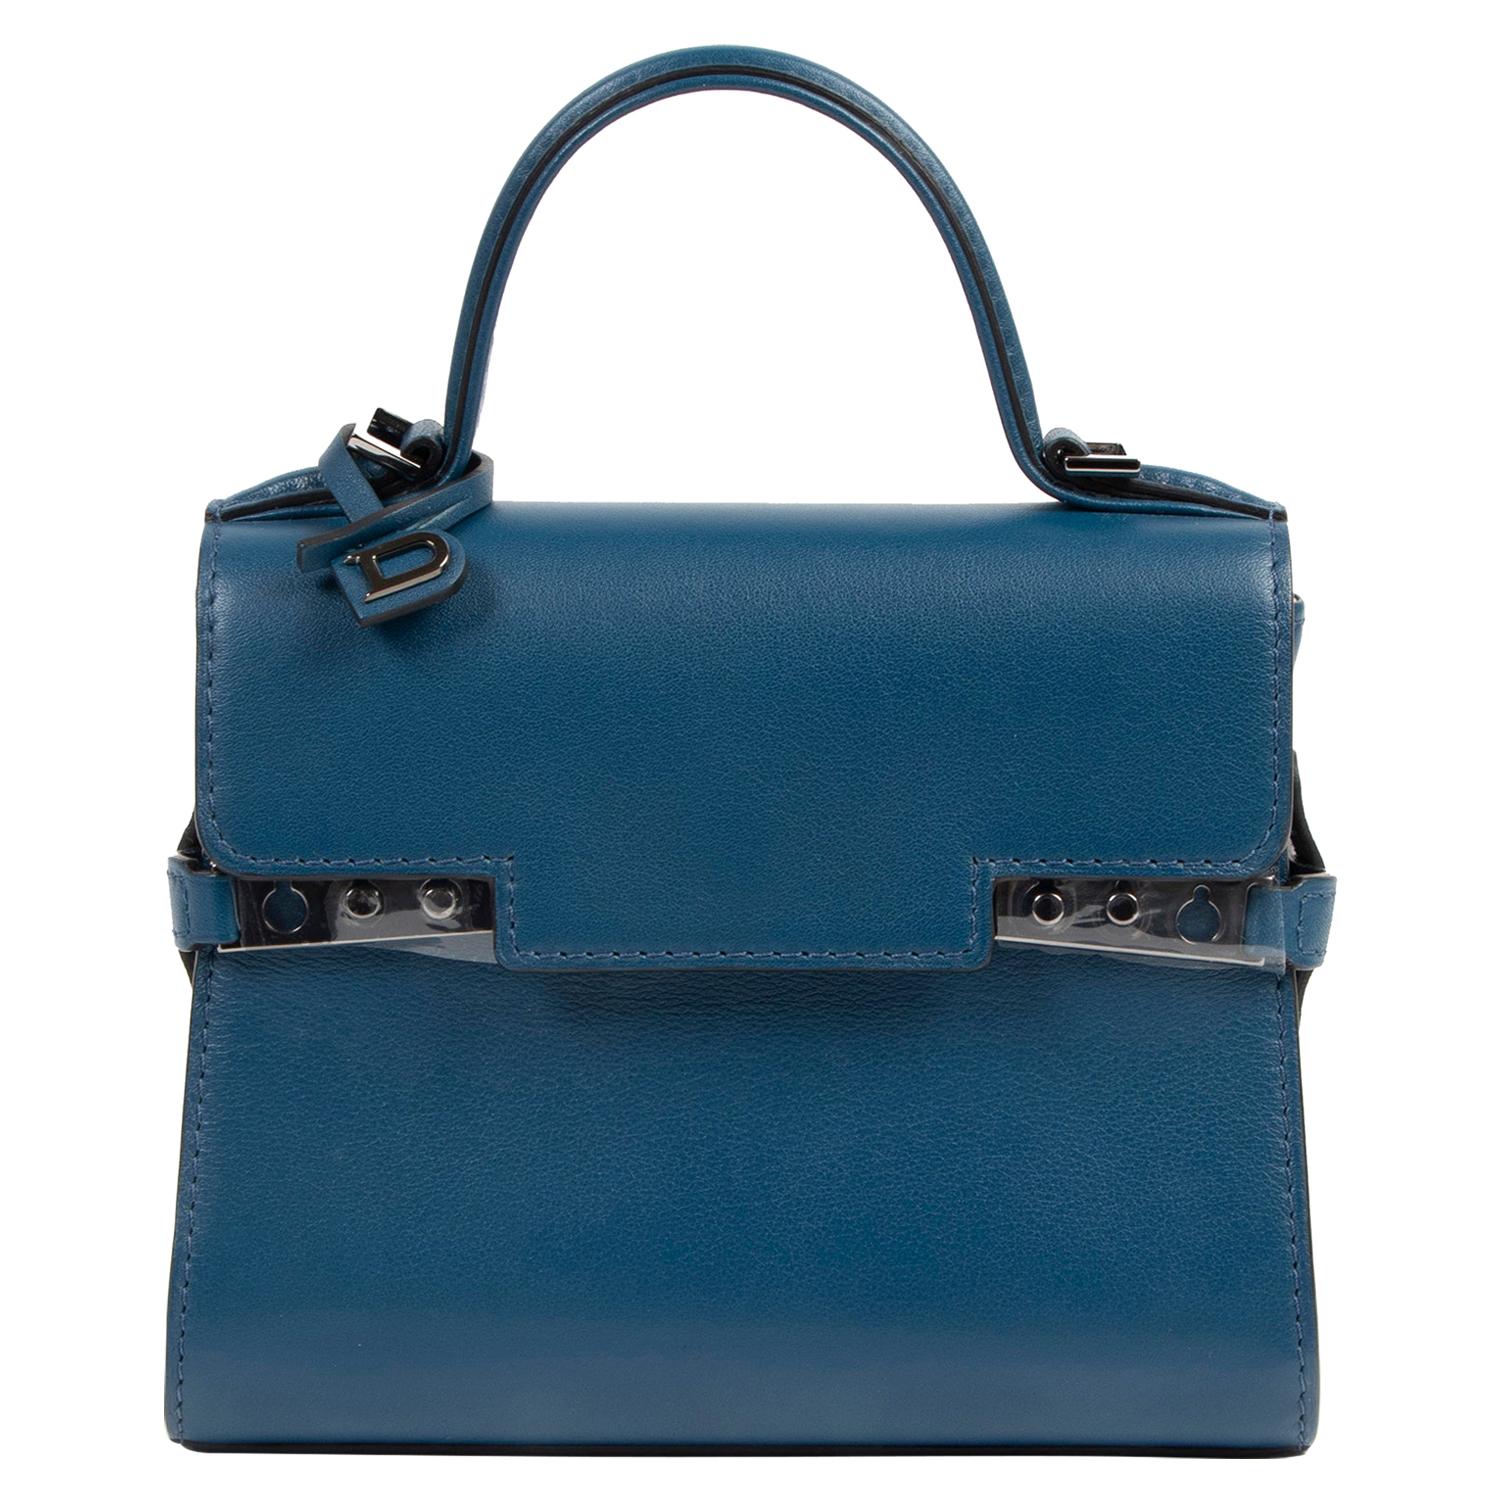 Delvaux Tempete - 3 For Sale on 1stDibs | delvaux tempete gm 